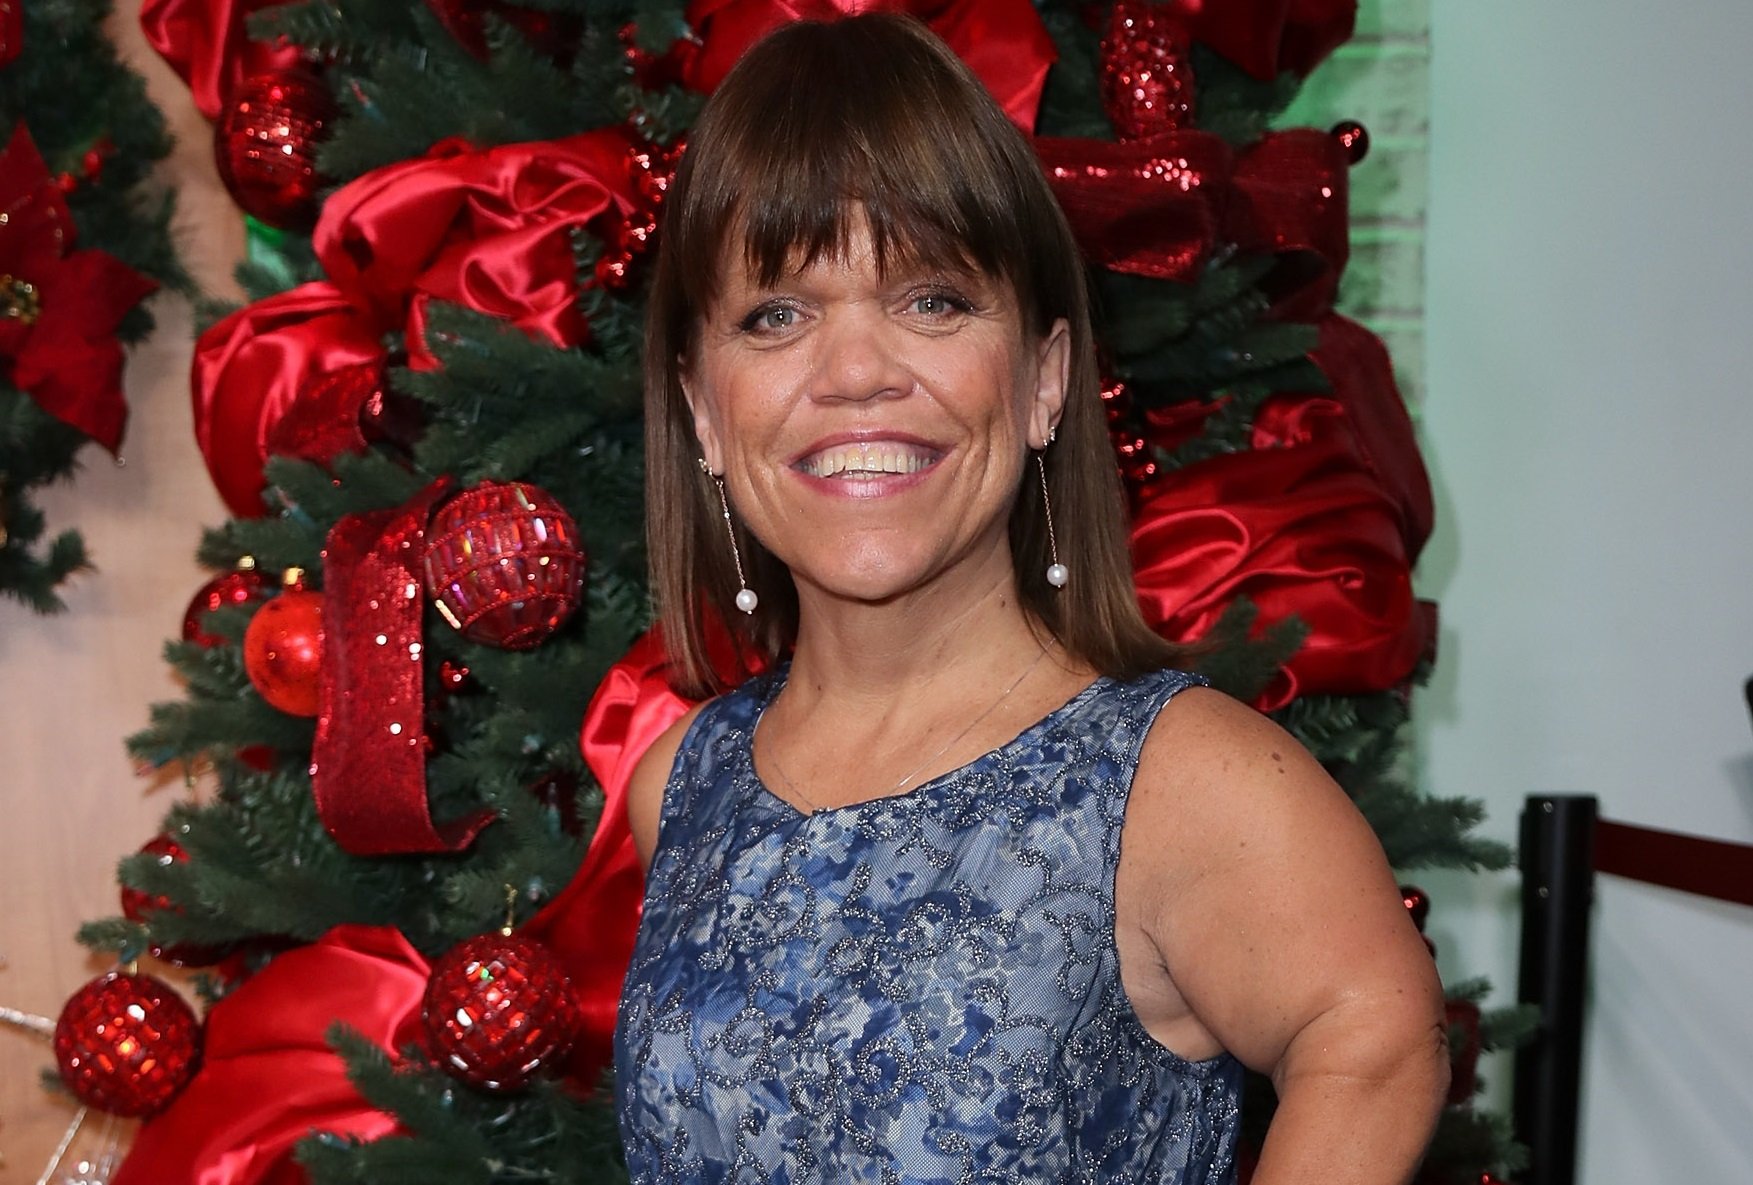 Amy Roloff smiles in front of a decorated Christmas tree